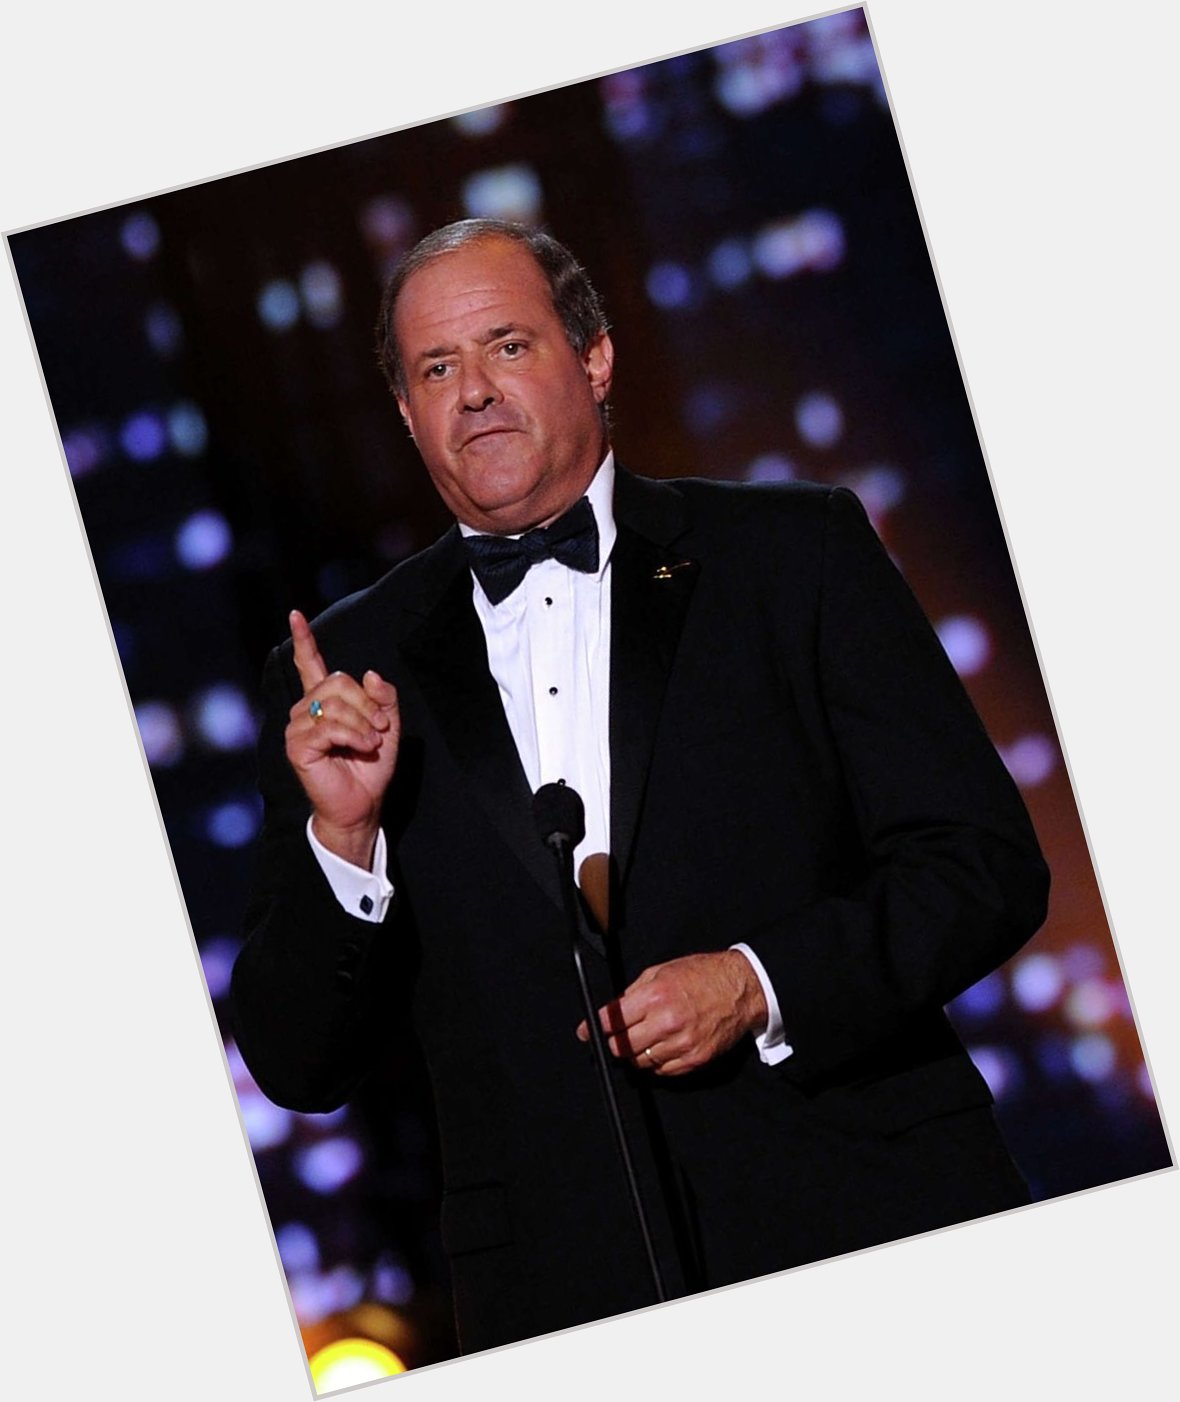 Happy birthday Chris Berman the guy who made me love sports analysts and broadcasting! 